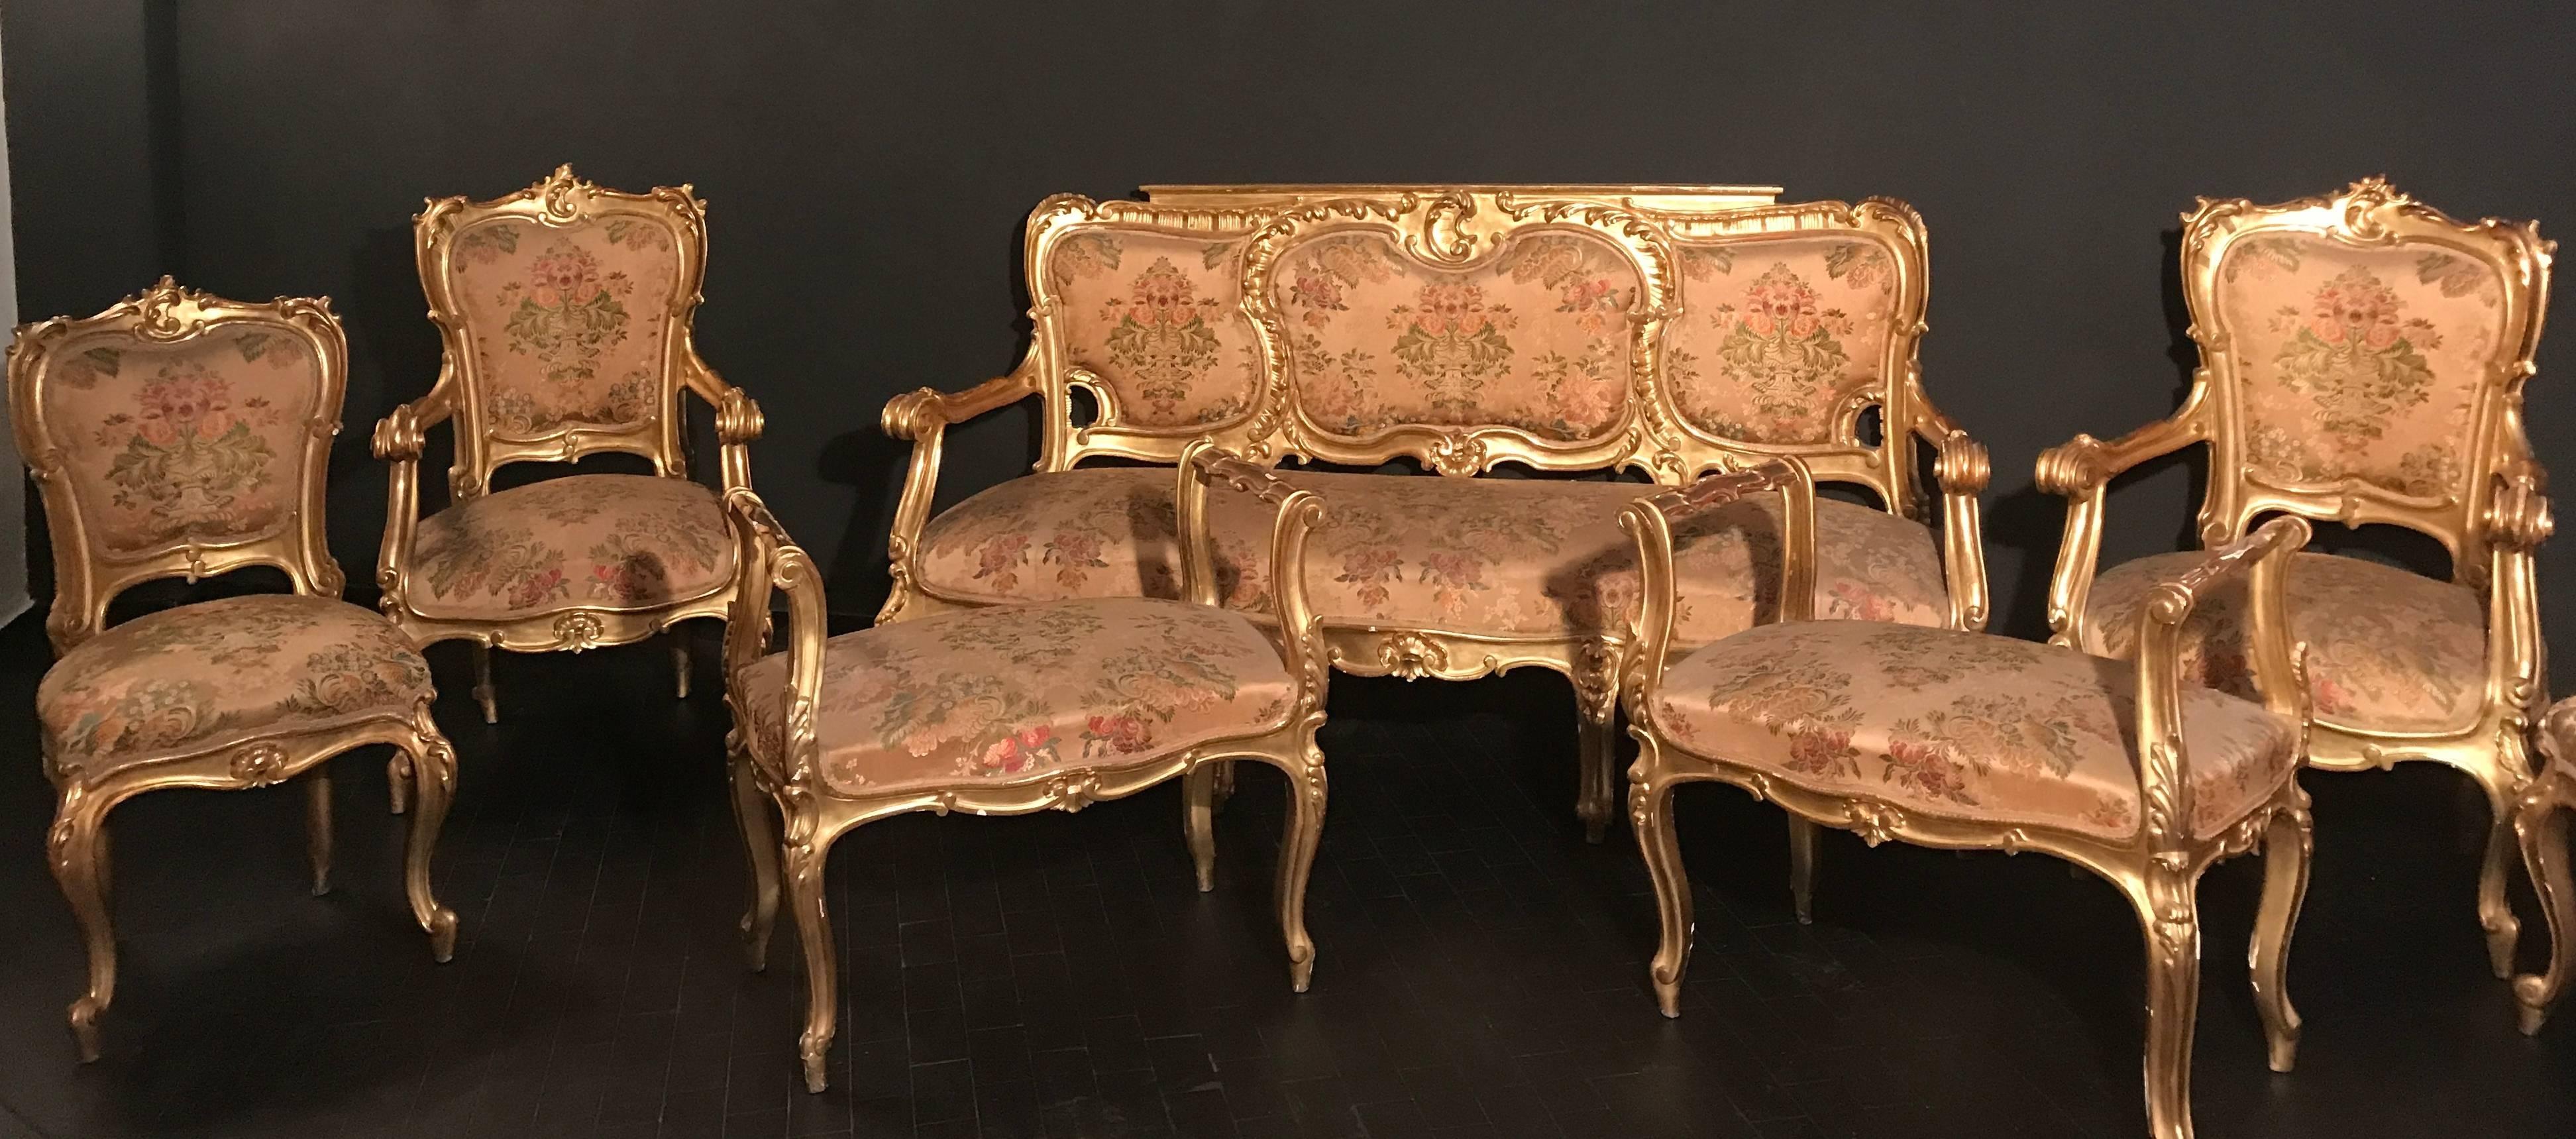 Pair of 19th Century Italian Gilt-Wood  Window Benches or Settees For Sale 5